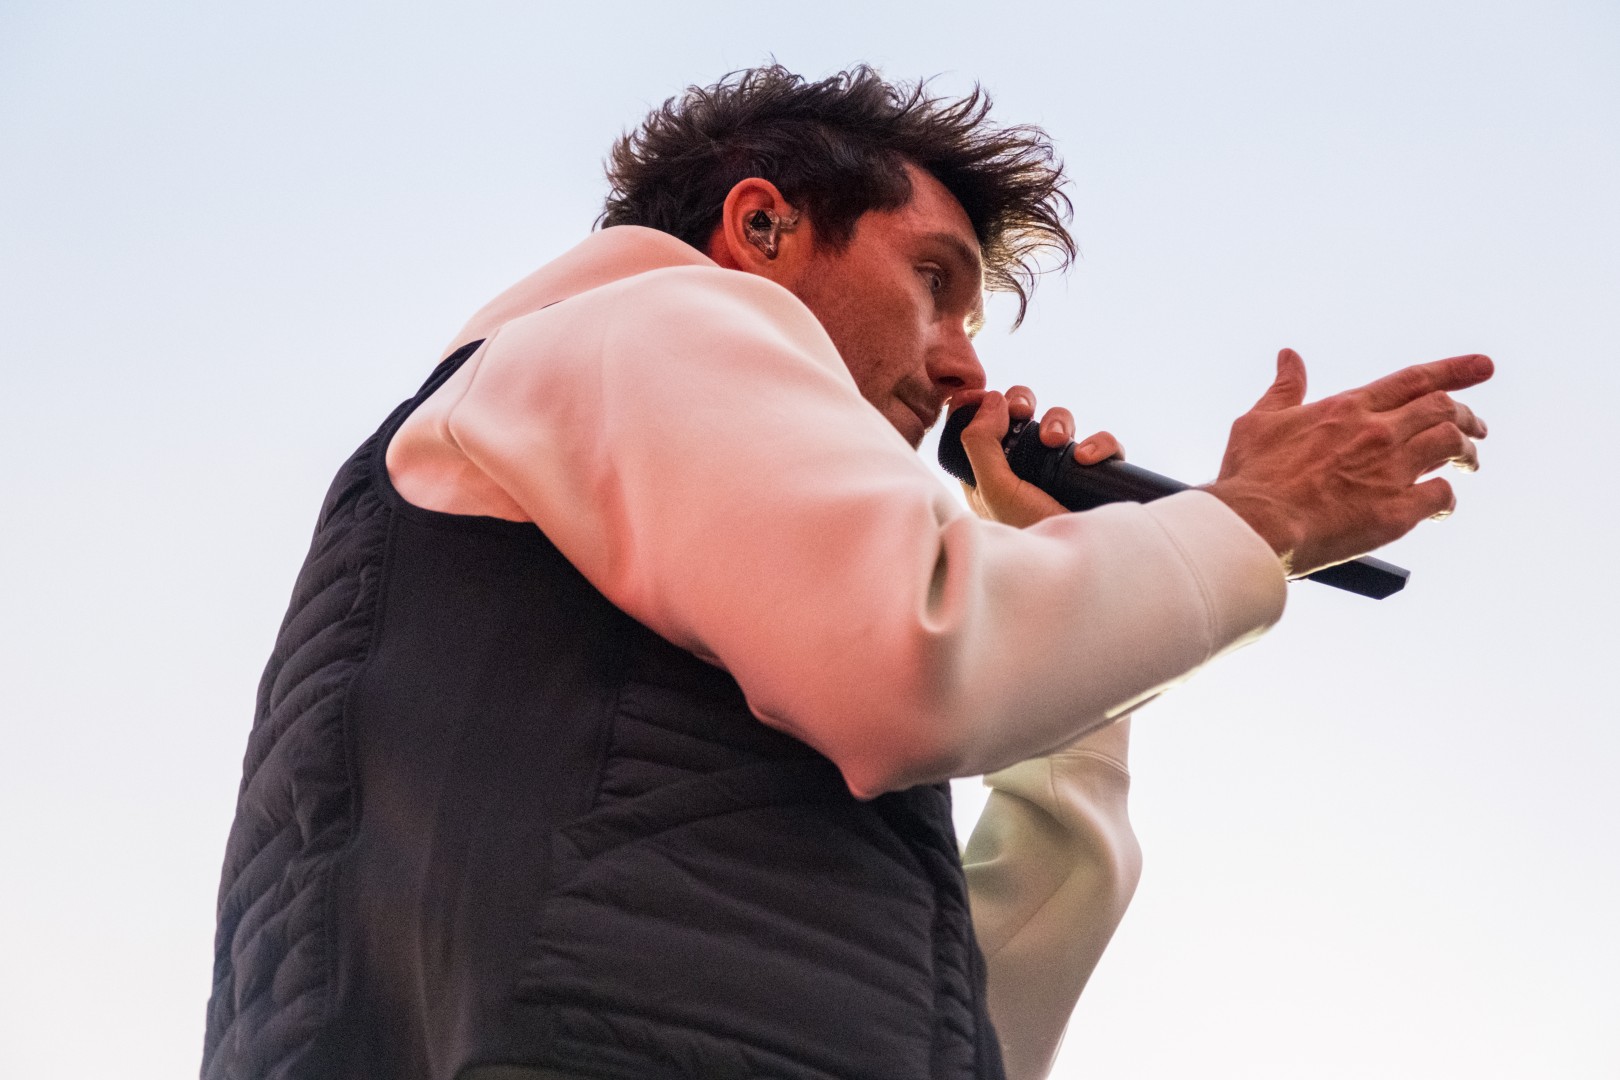 Bastille at Óbudai-sziget in Budapest on August 11, 2022 (30a8160d5a)